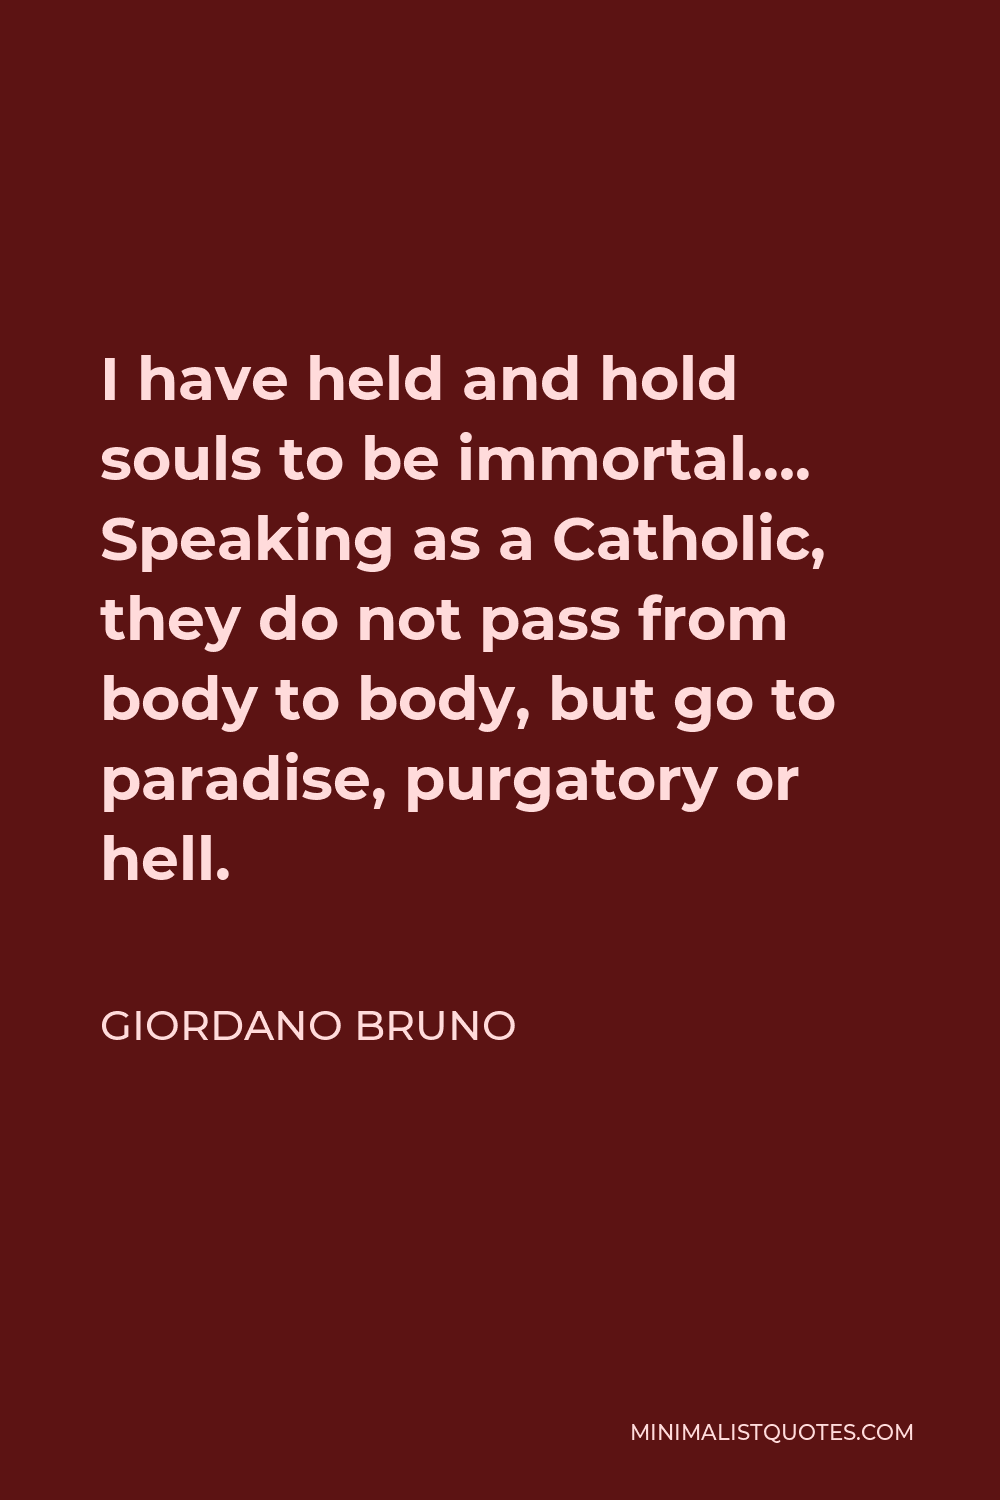 Giordano Bruno Quote - I have held and hold souls to be immortal…. Speaking as a Catholic, they do not pass from body to body, but go to paradise, purgatory or hell.